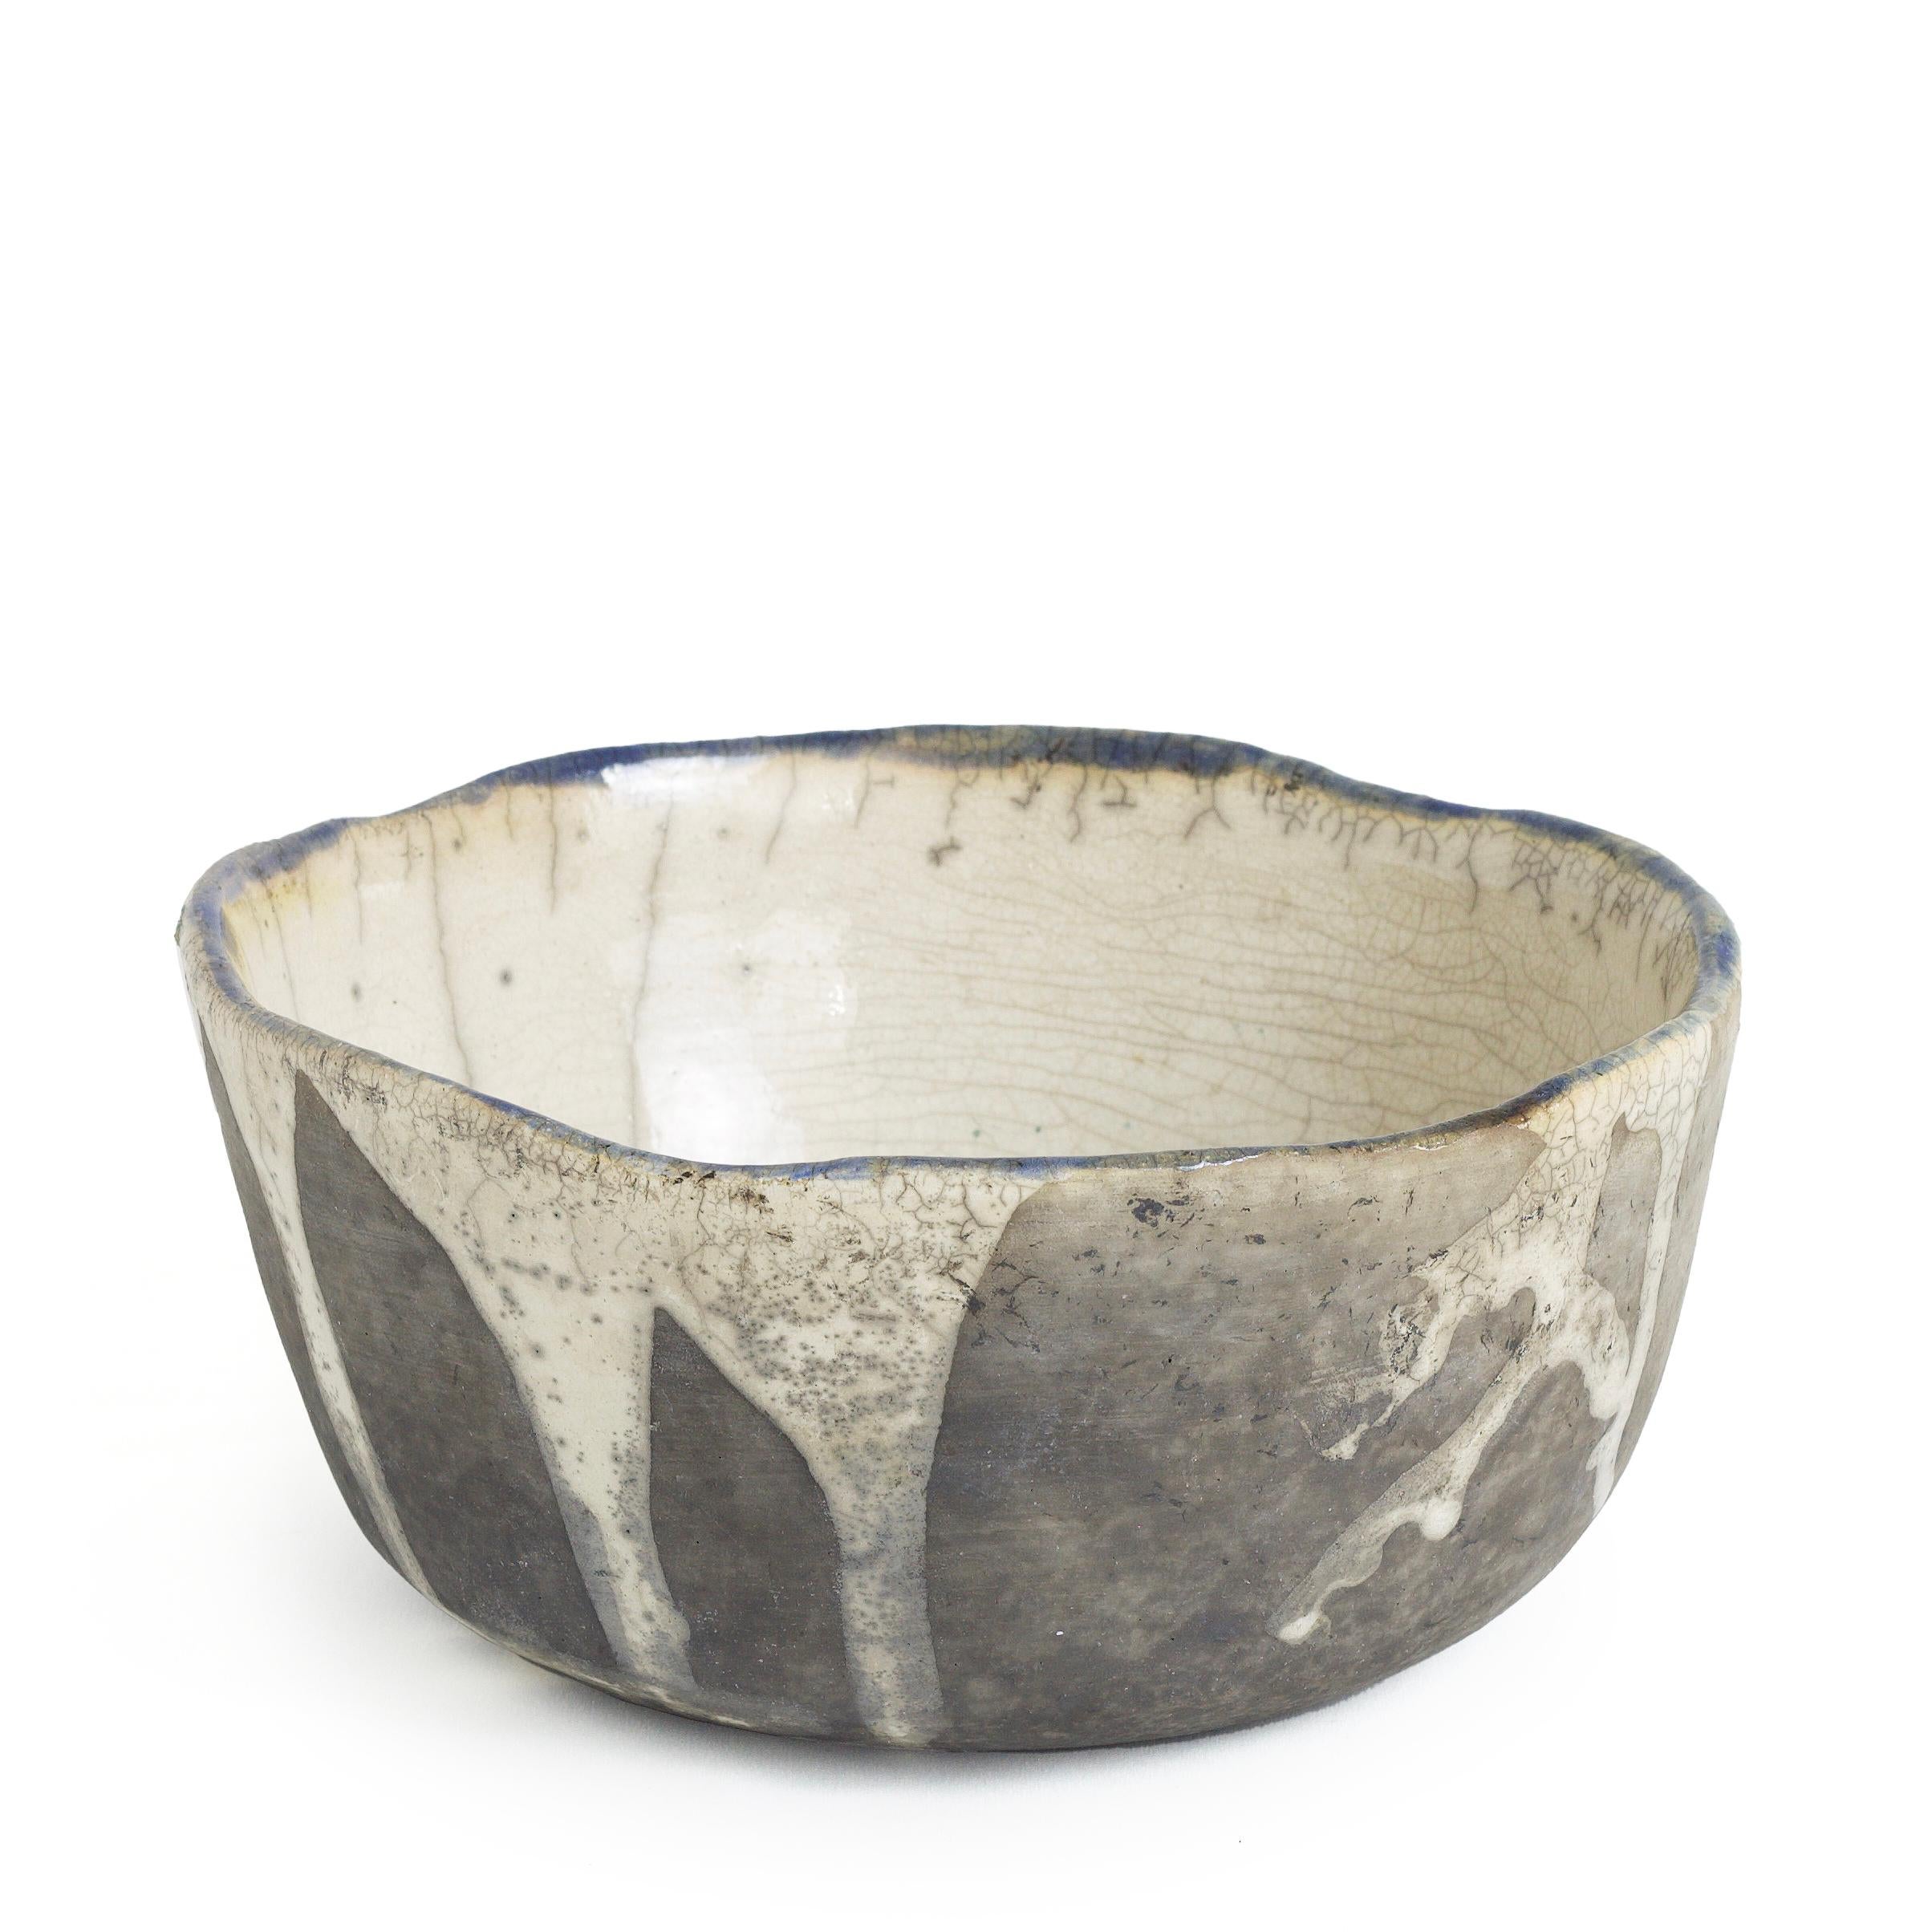 Tanoa is a large bowl, designed with simplicity and masterful skill of the raku firing technique expressing the master artisan will in its white crackle drippings and black burn clay effect. A large, natural, organic looking piece that can be a